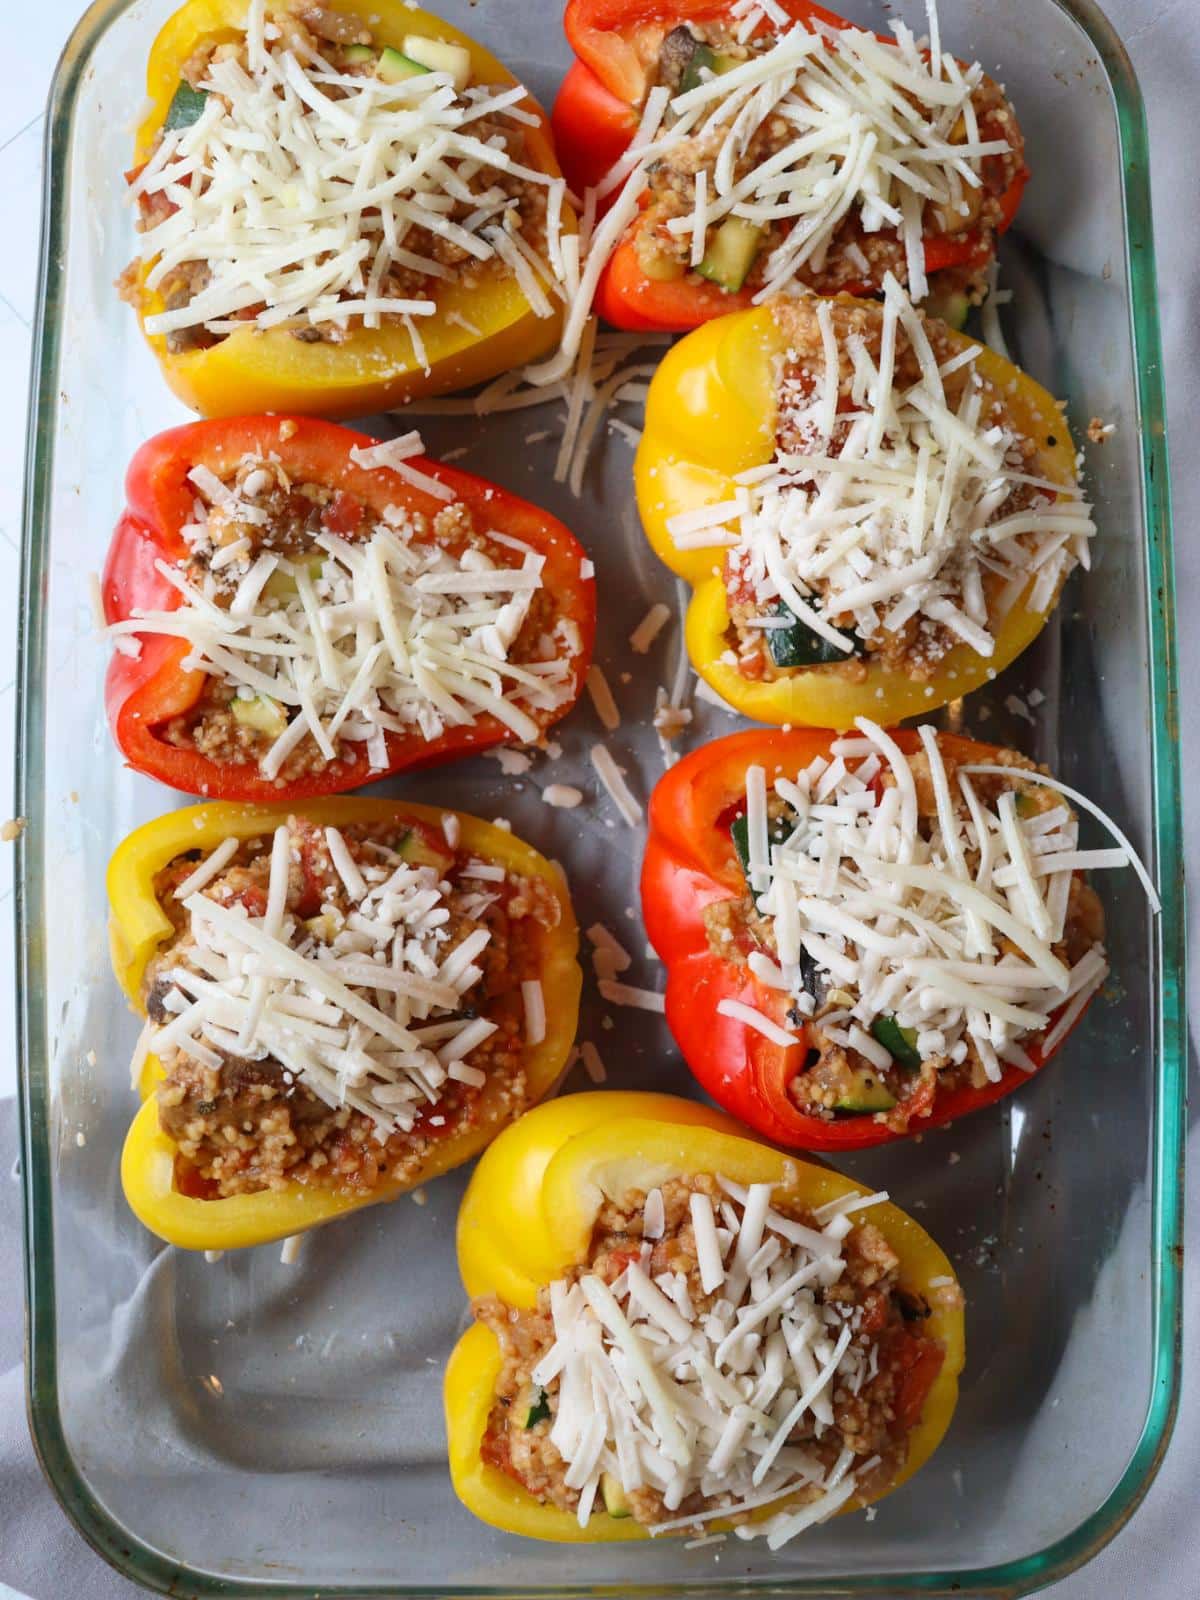 Couscous stuffed peppers in a baking dish, topped with vegan cheese, before getting roasted.